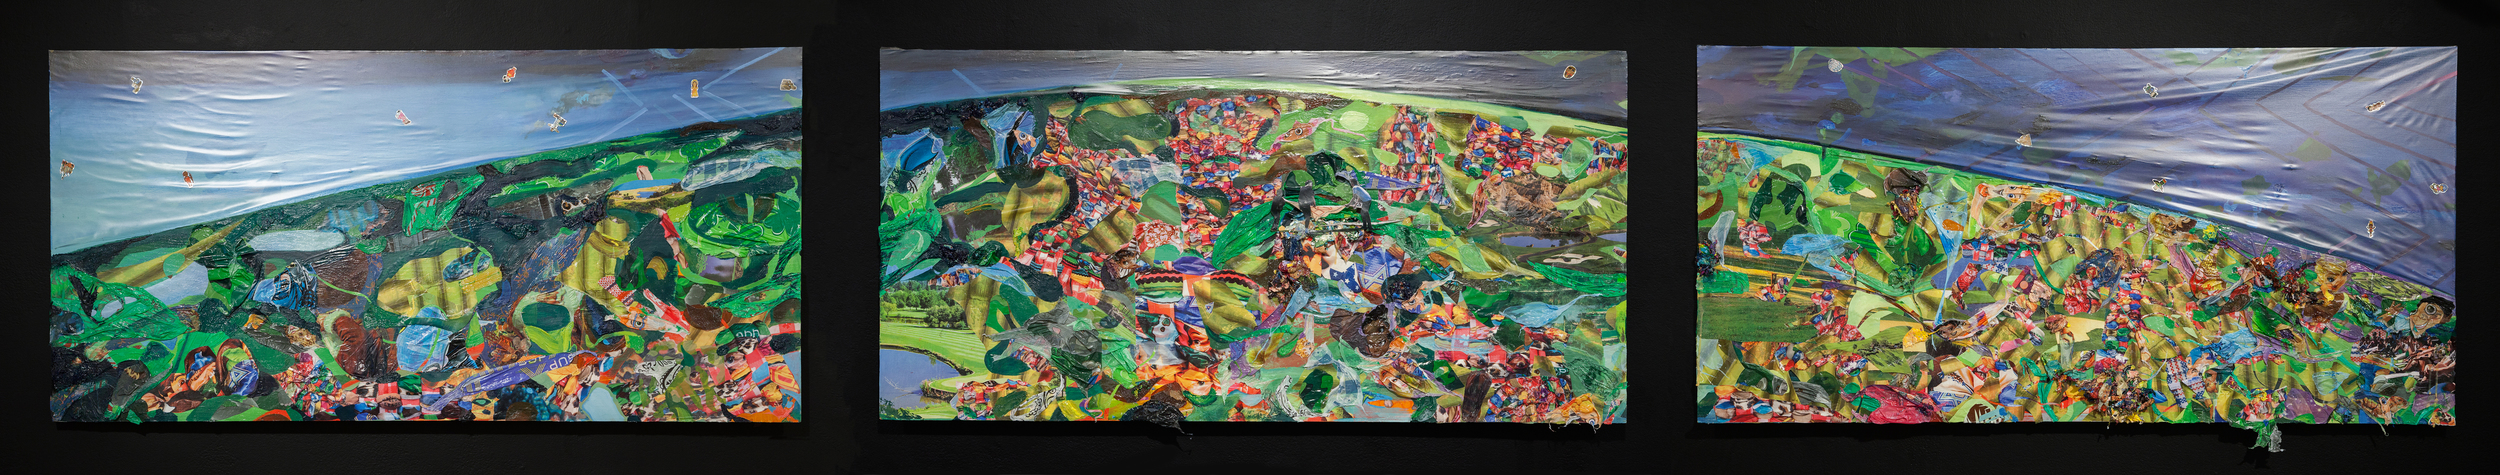   Screening for Adhesive Ancestors,&nbsp; 2015, oil, acrylic, plastic tablecloths, vinyl drawer liner, photos and stickers on wood panel, 24 x 108 x 4 inches 